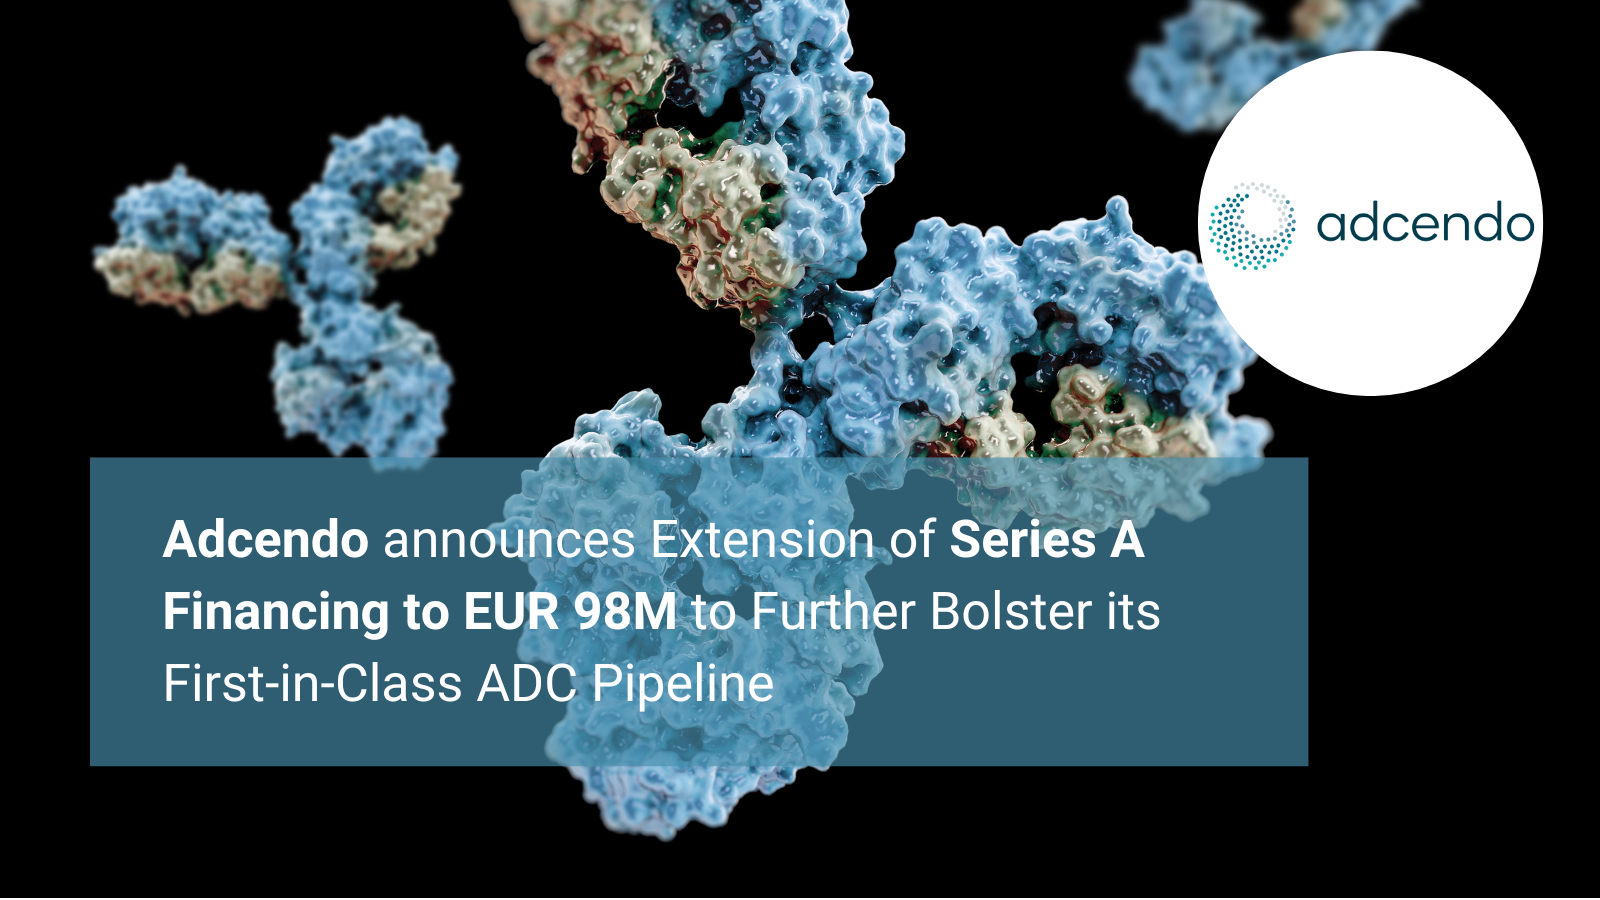 Adcendo ApS Announces Extension of Series A Financing to EUR 98M to Further Bolster its First-in-Class ADC Pipeline<